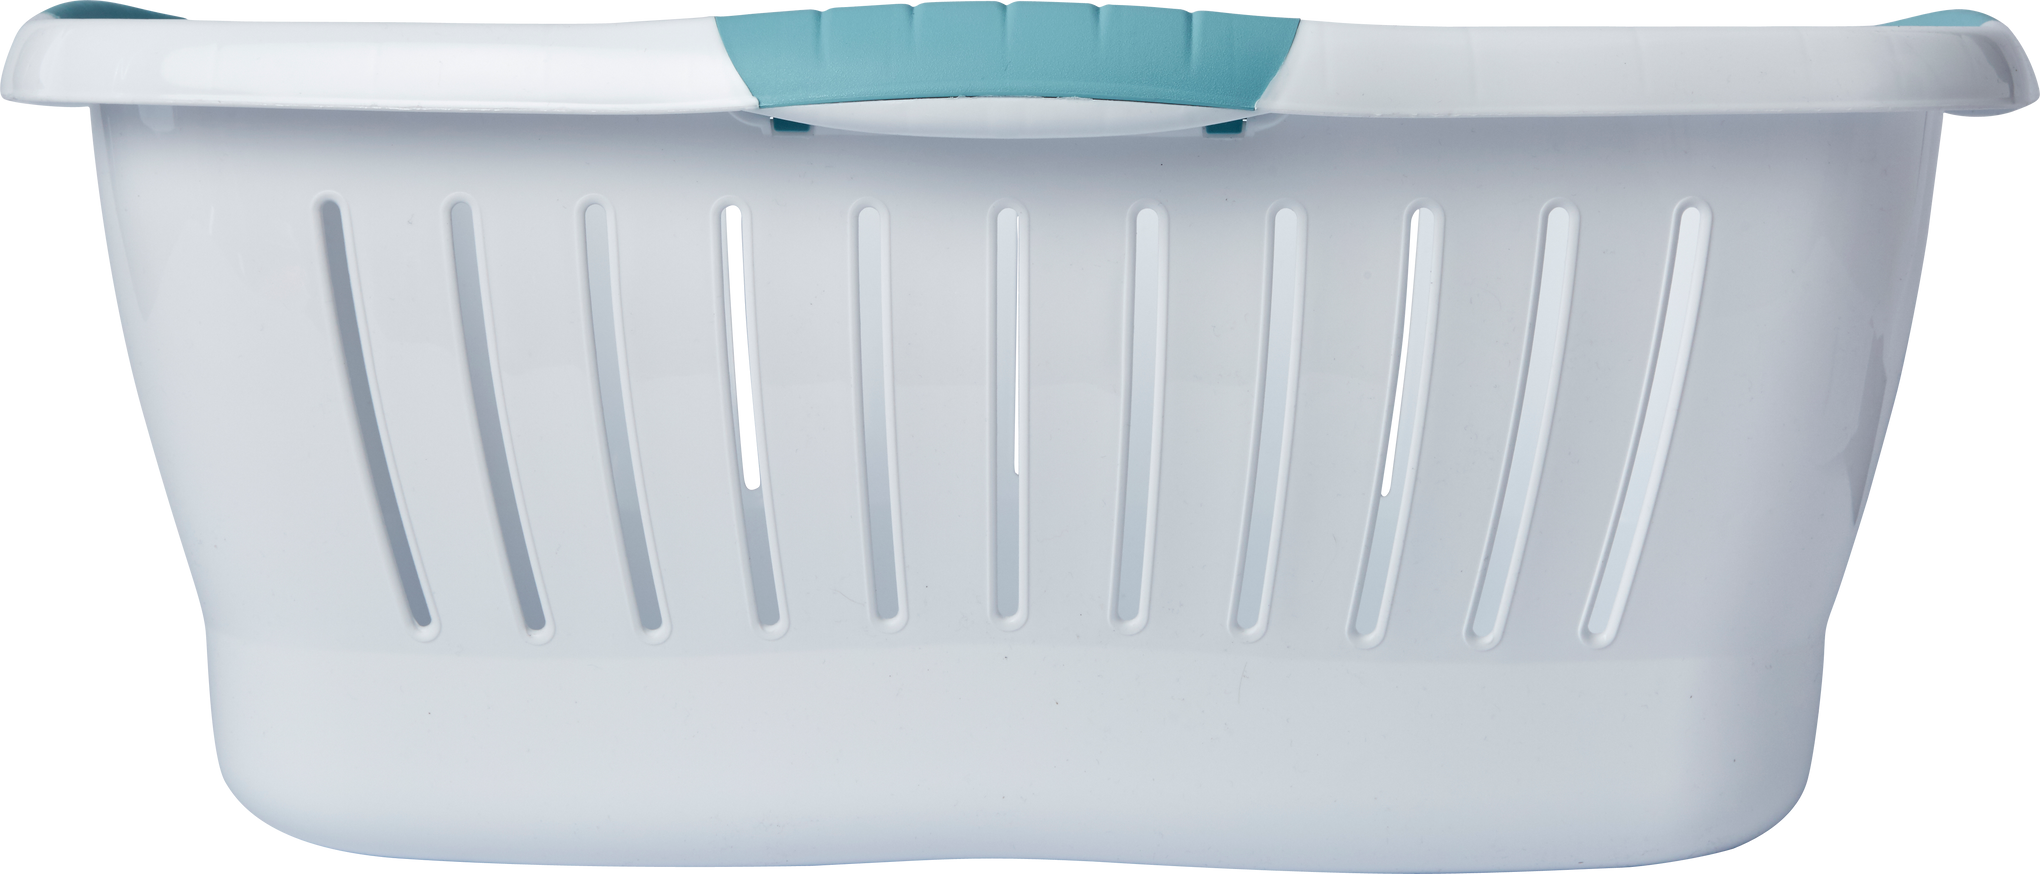 White plastic laundry basket with teal coloured handles